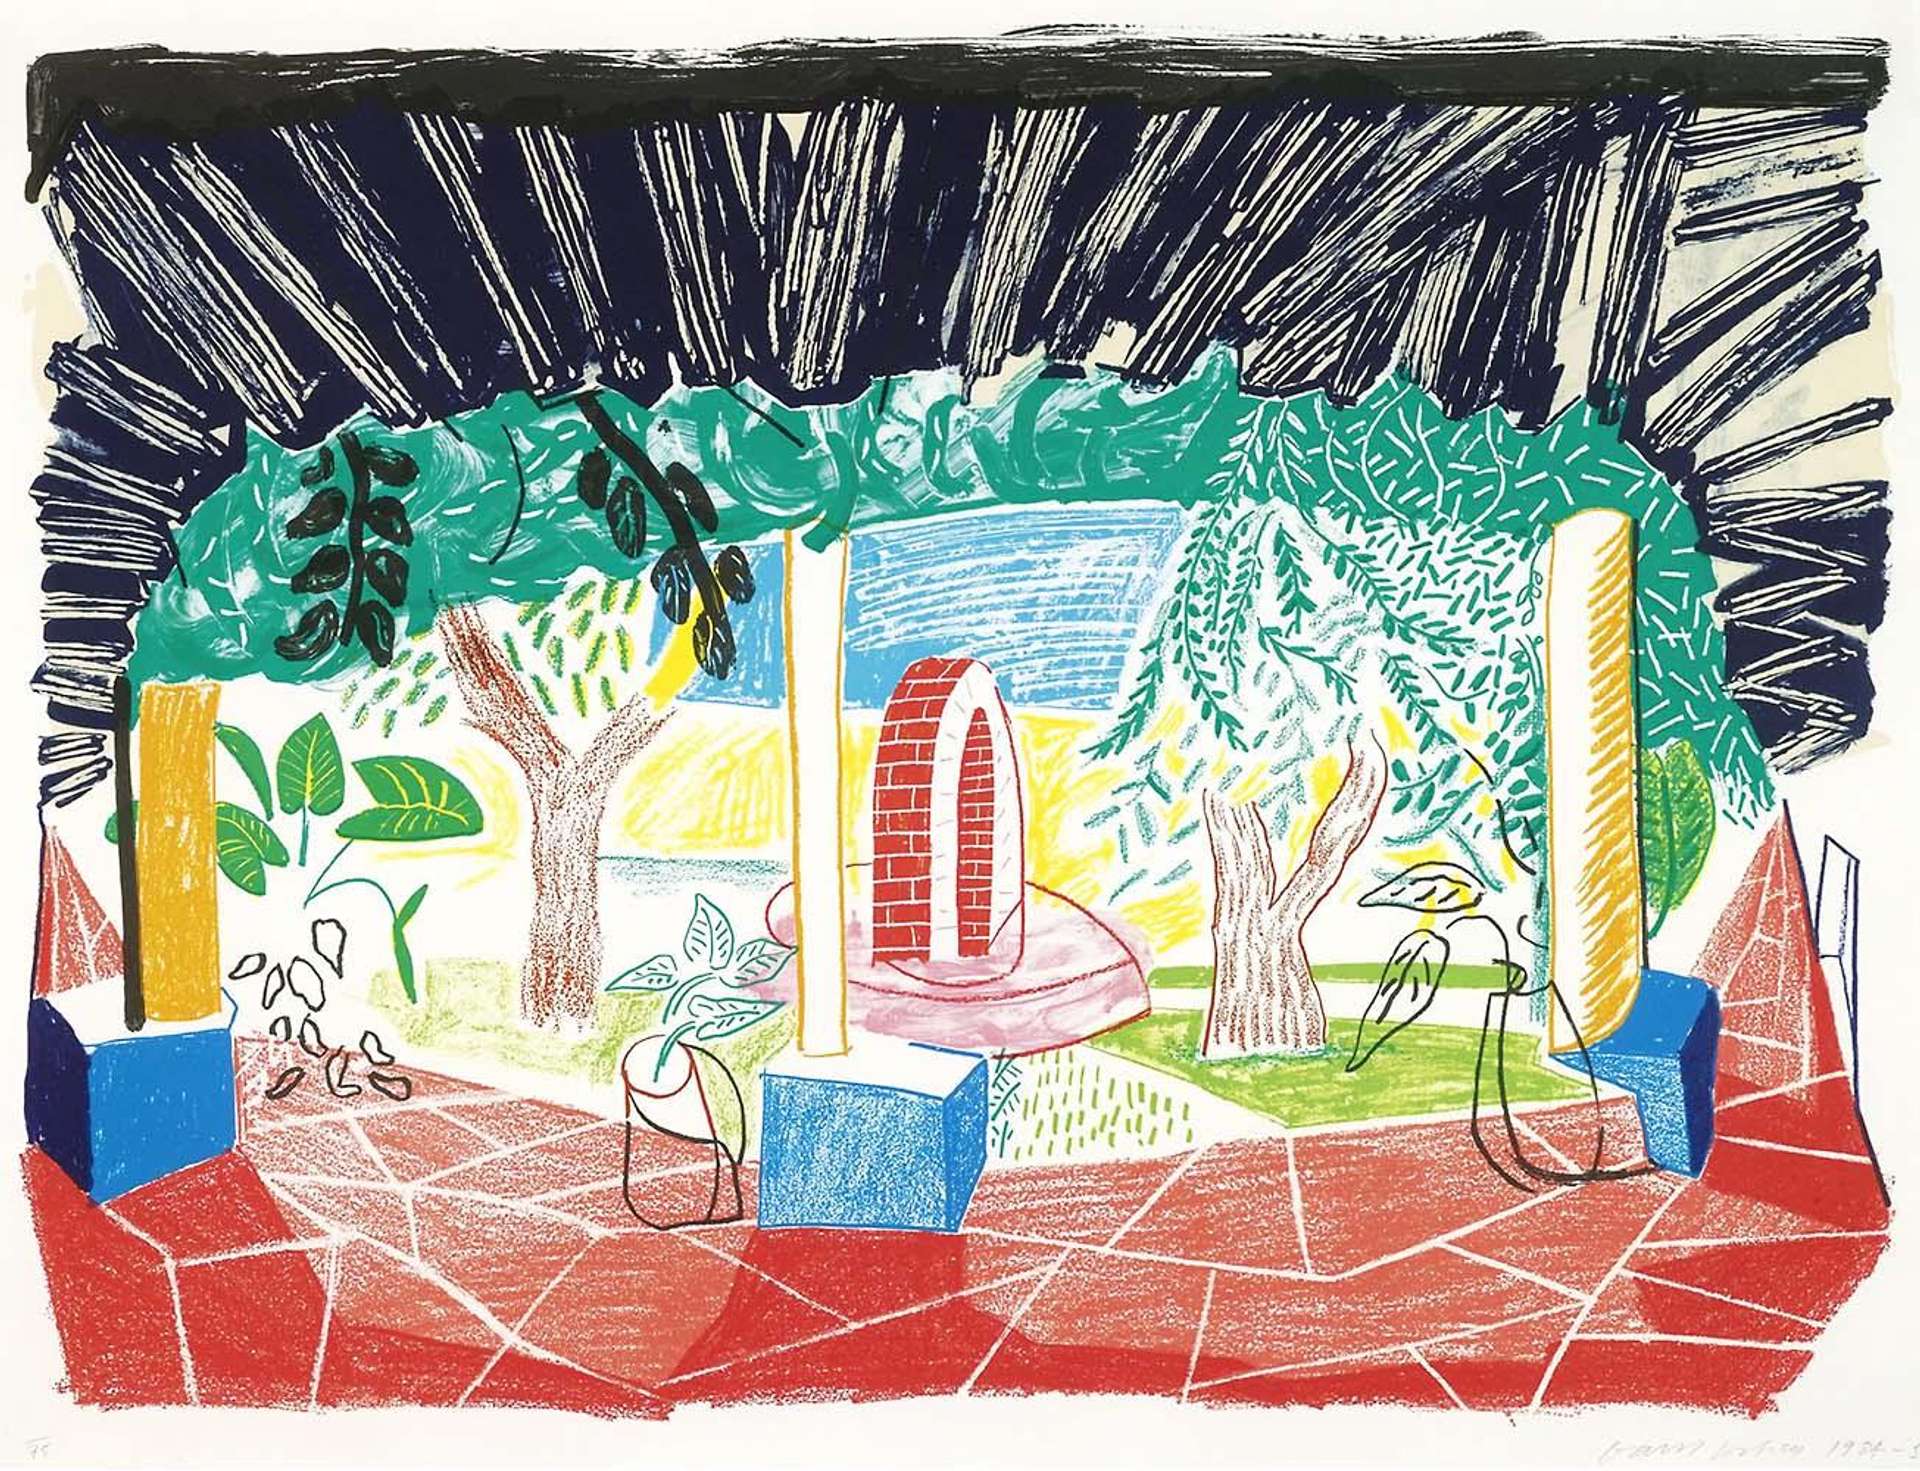 David Hockney’s Views Of Hotel Well I. A lithographic print of the interior and exterior setting of a hotel well and its patio setting surrounded by pillars and exposed interior covering. 